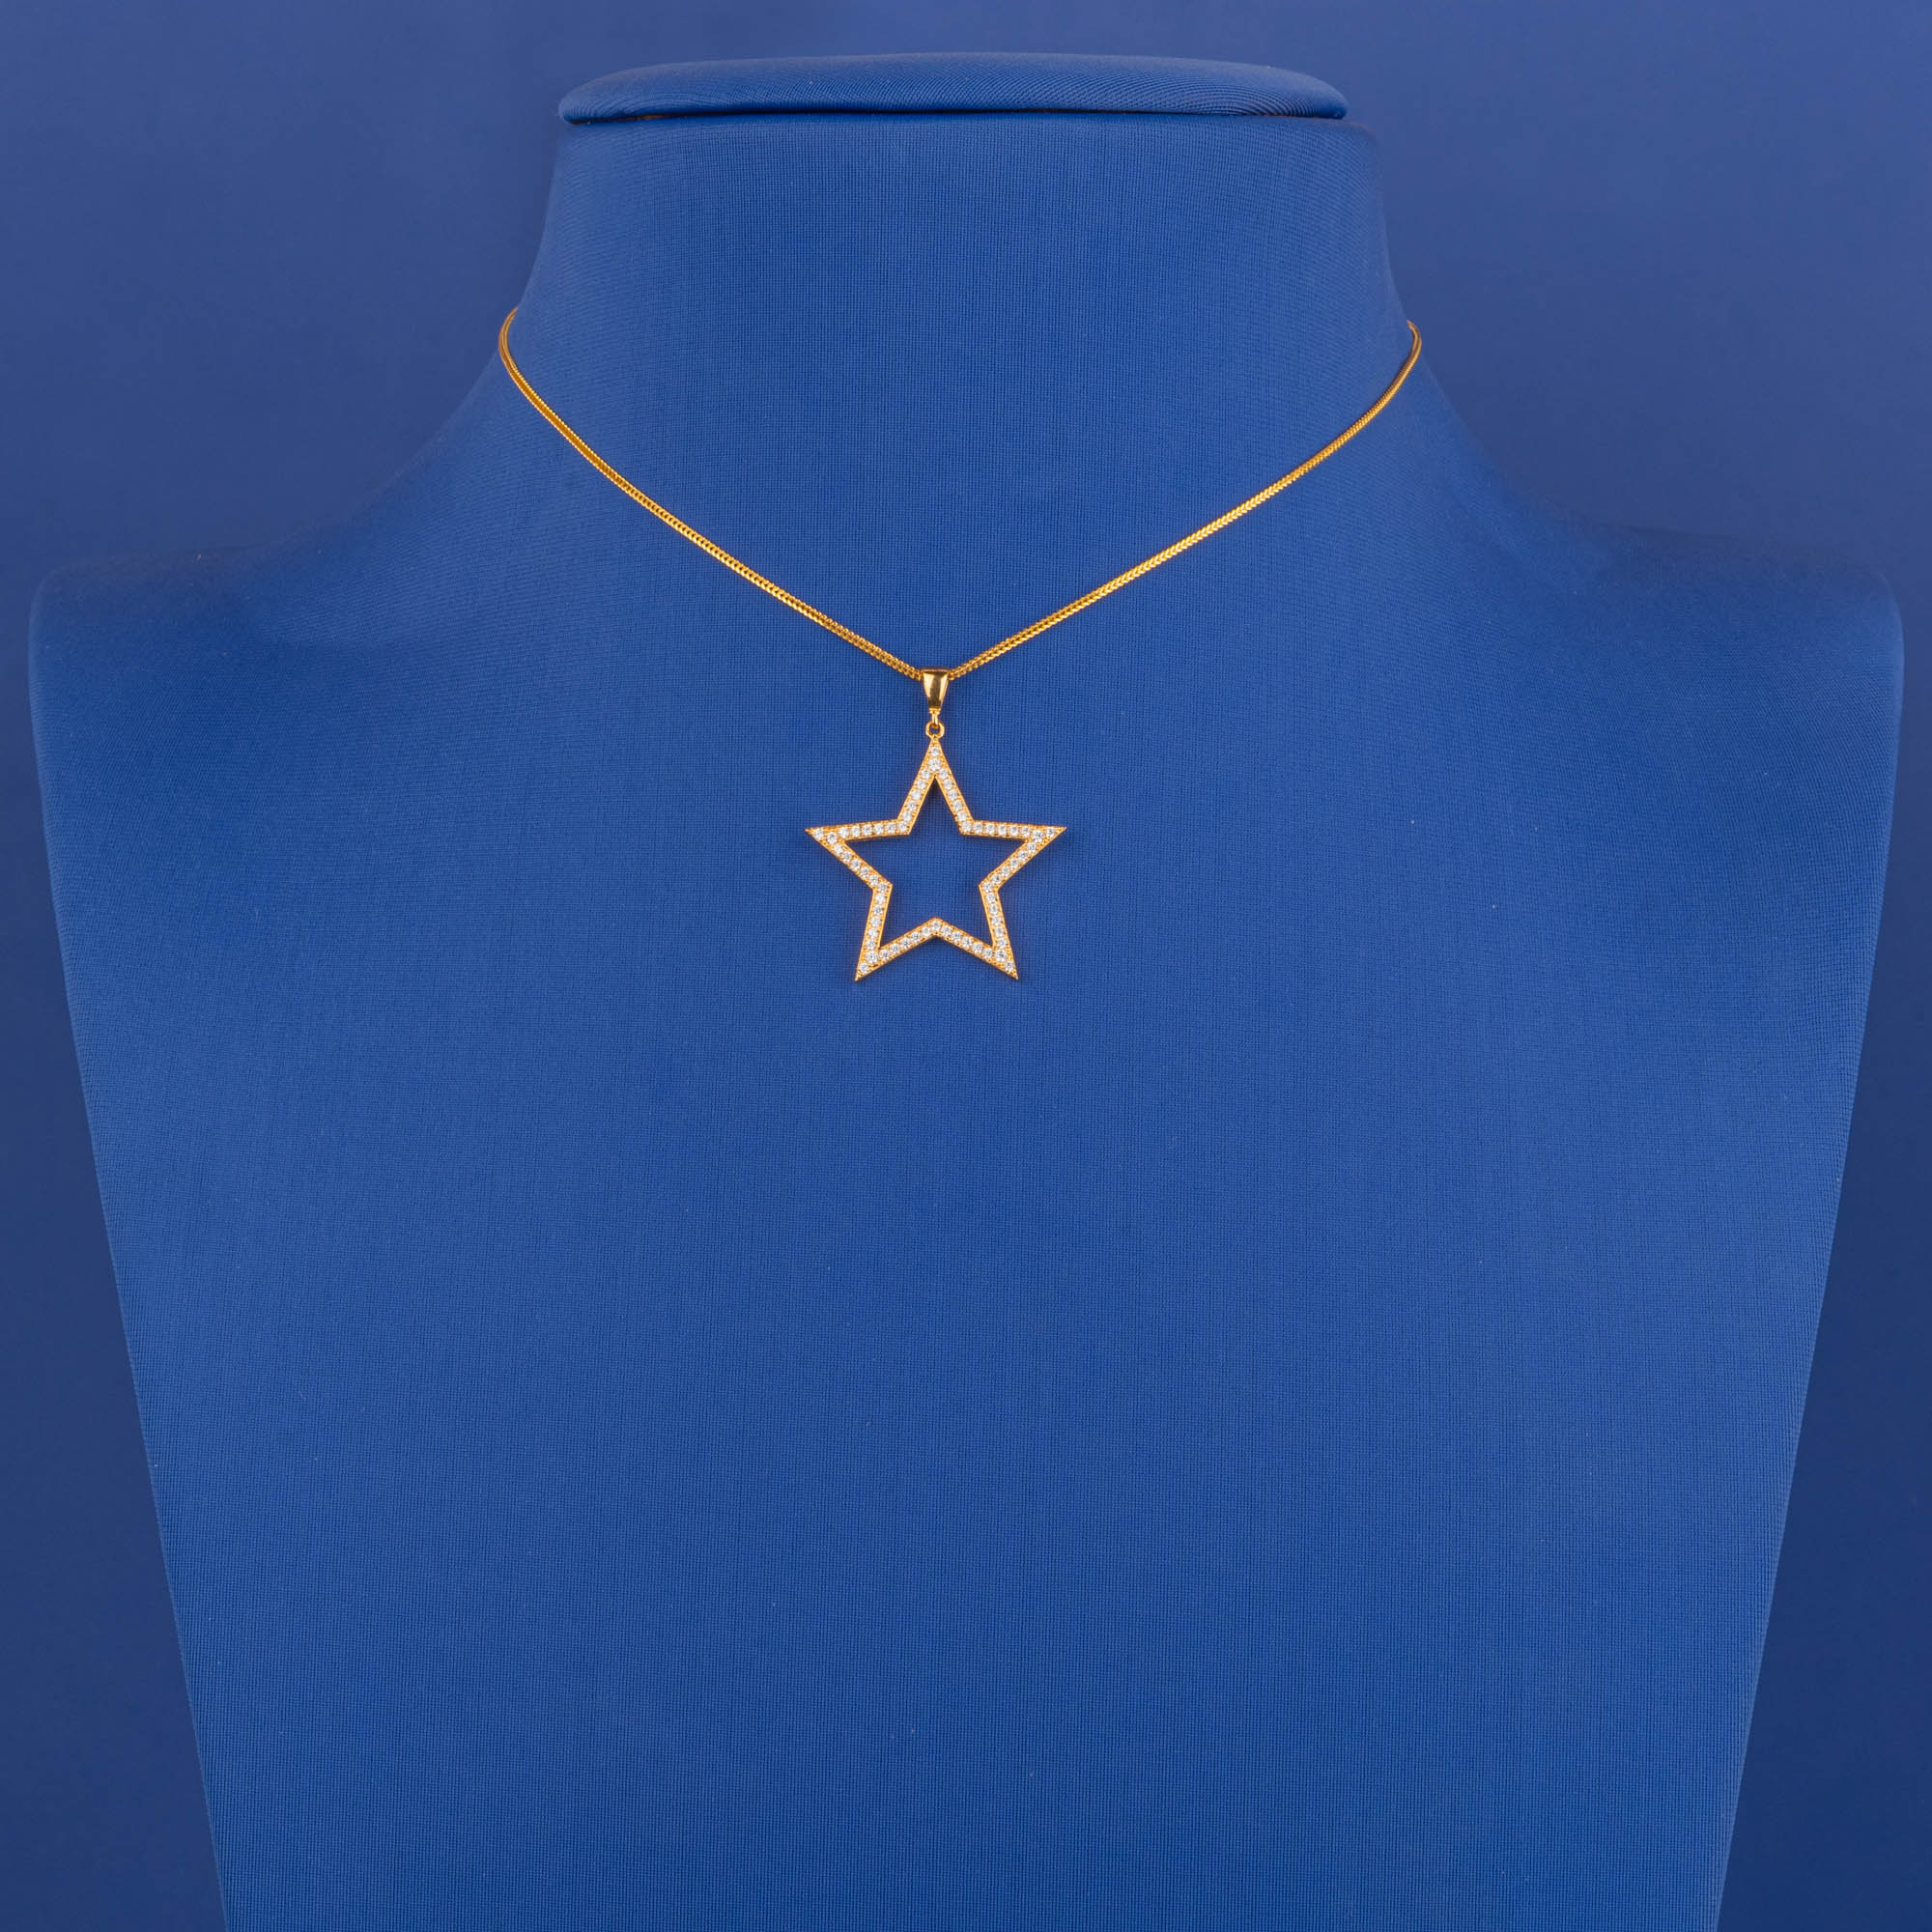 Handmade 22K Gold Cz Star Pendant (chain not included)